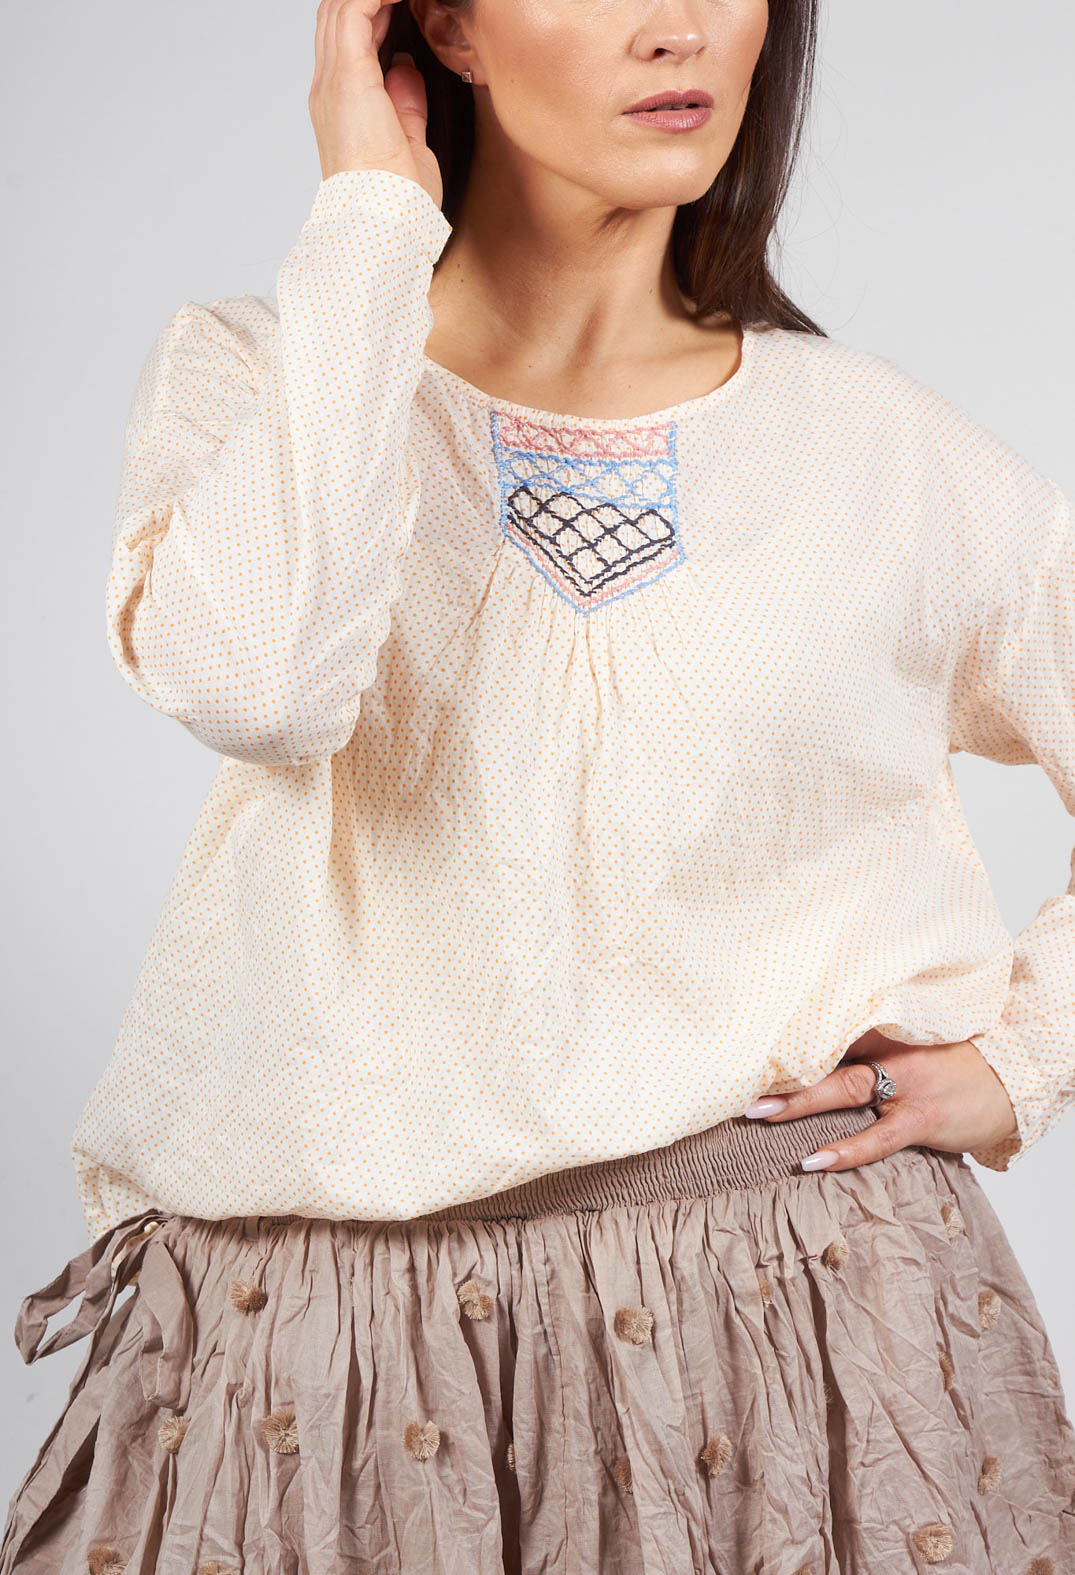 Isa Blouse is Voile Dot